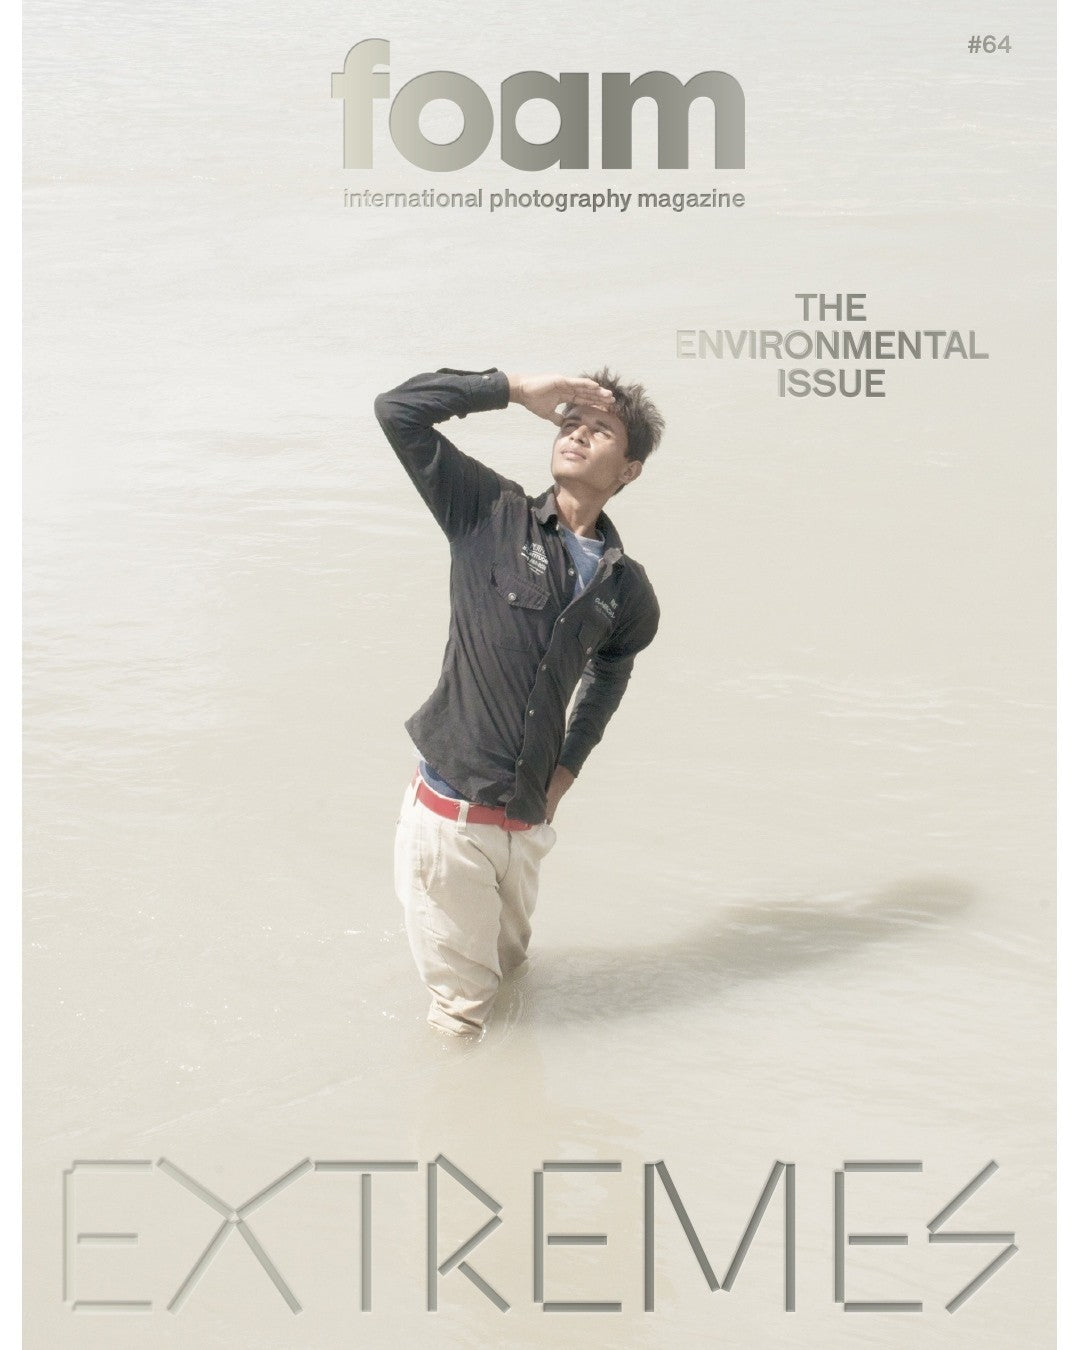 Foam Magazine #64 / EXTREMES – The Environmental Issue